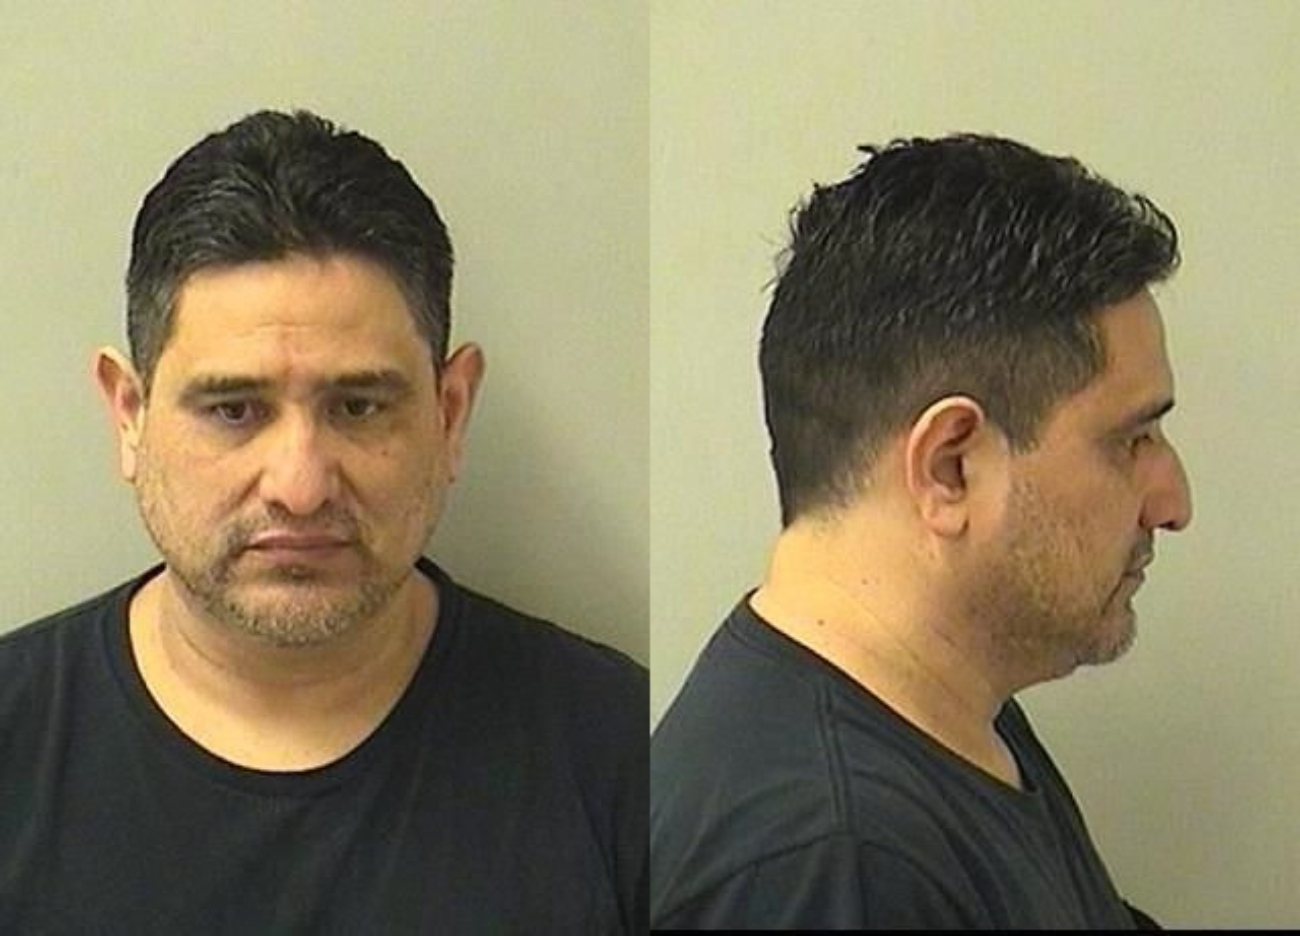 Luis Alberto Najera, 48, of Elgin faces 36 years in prison for sexually abusing an 11-year-old victim